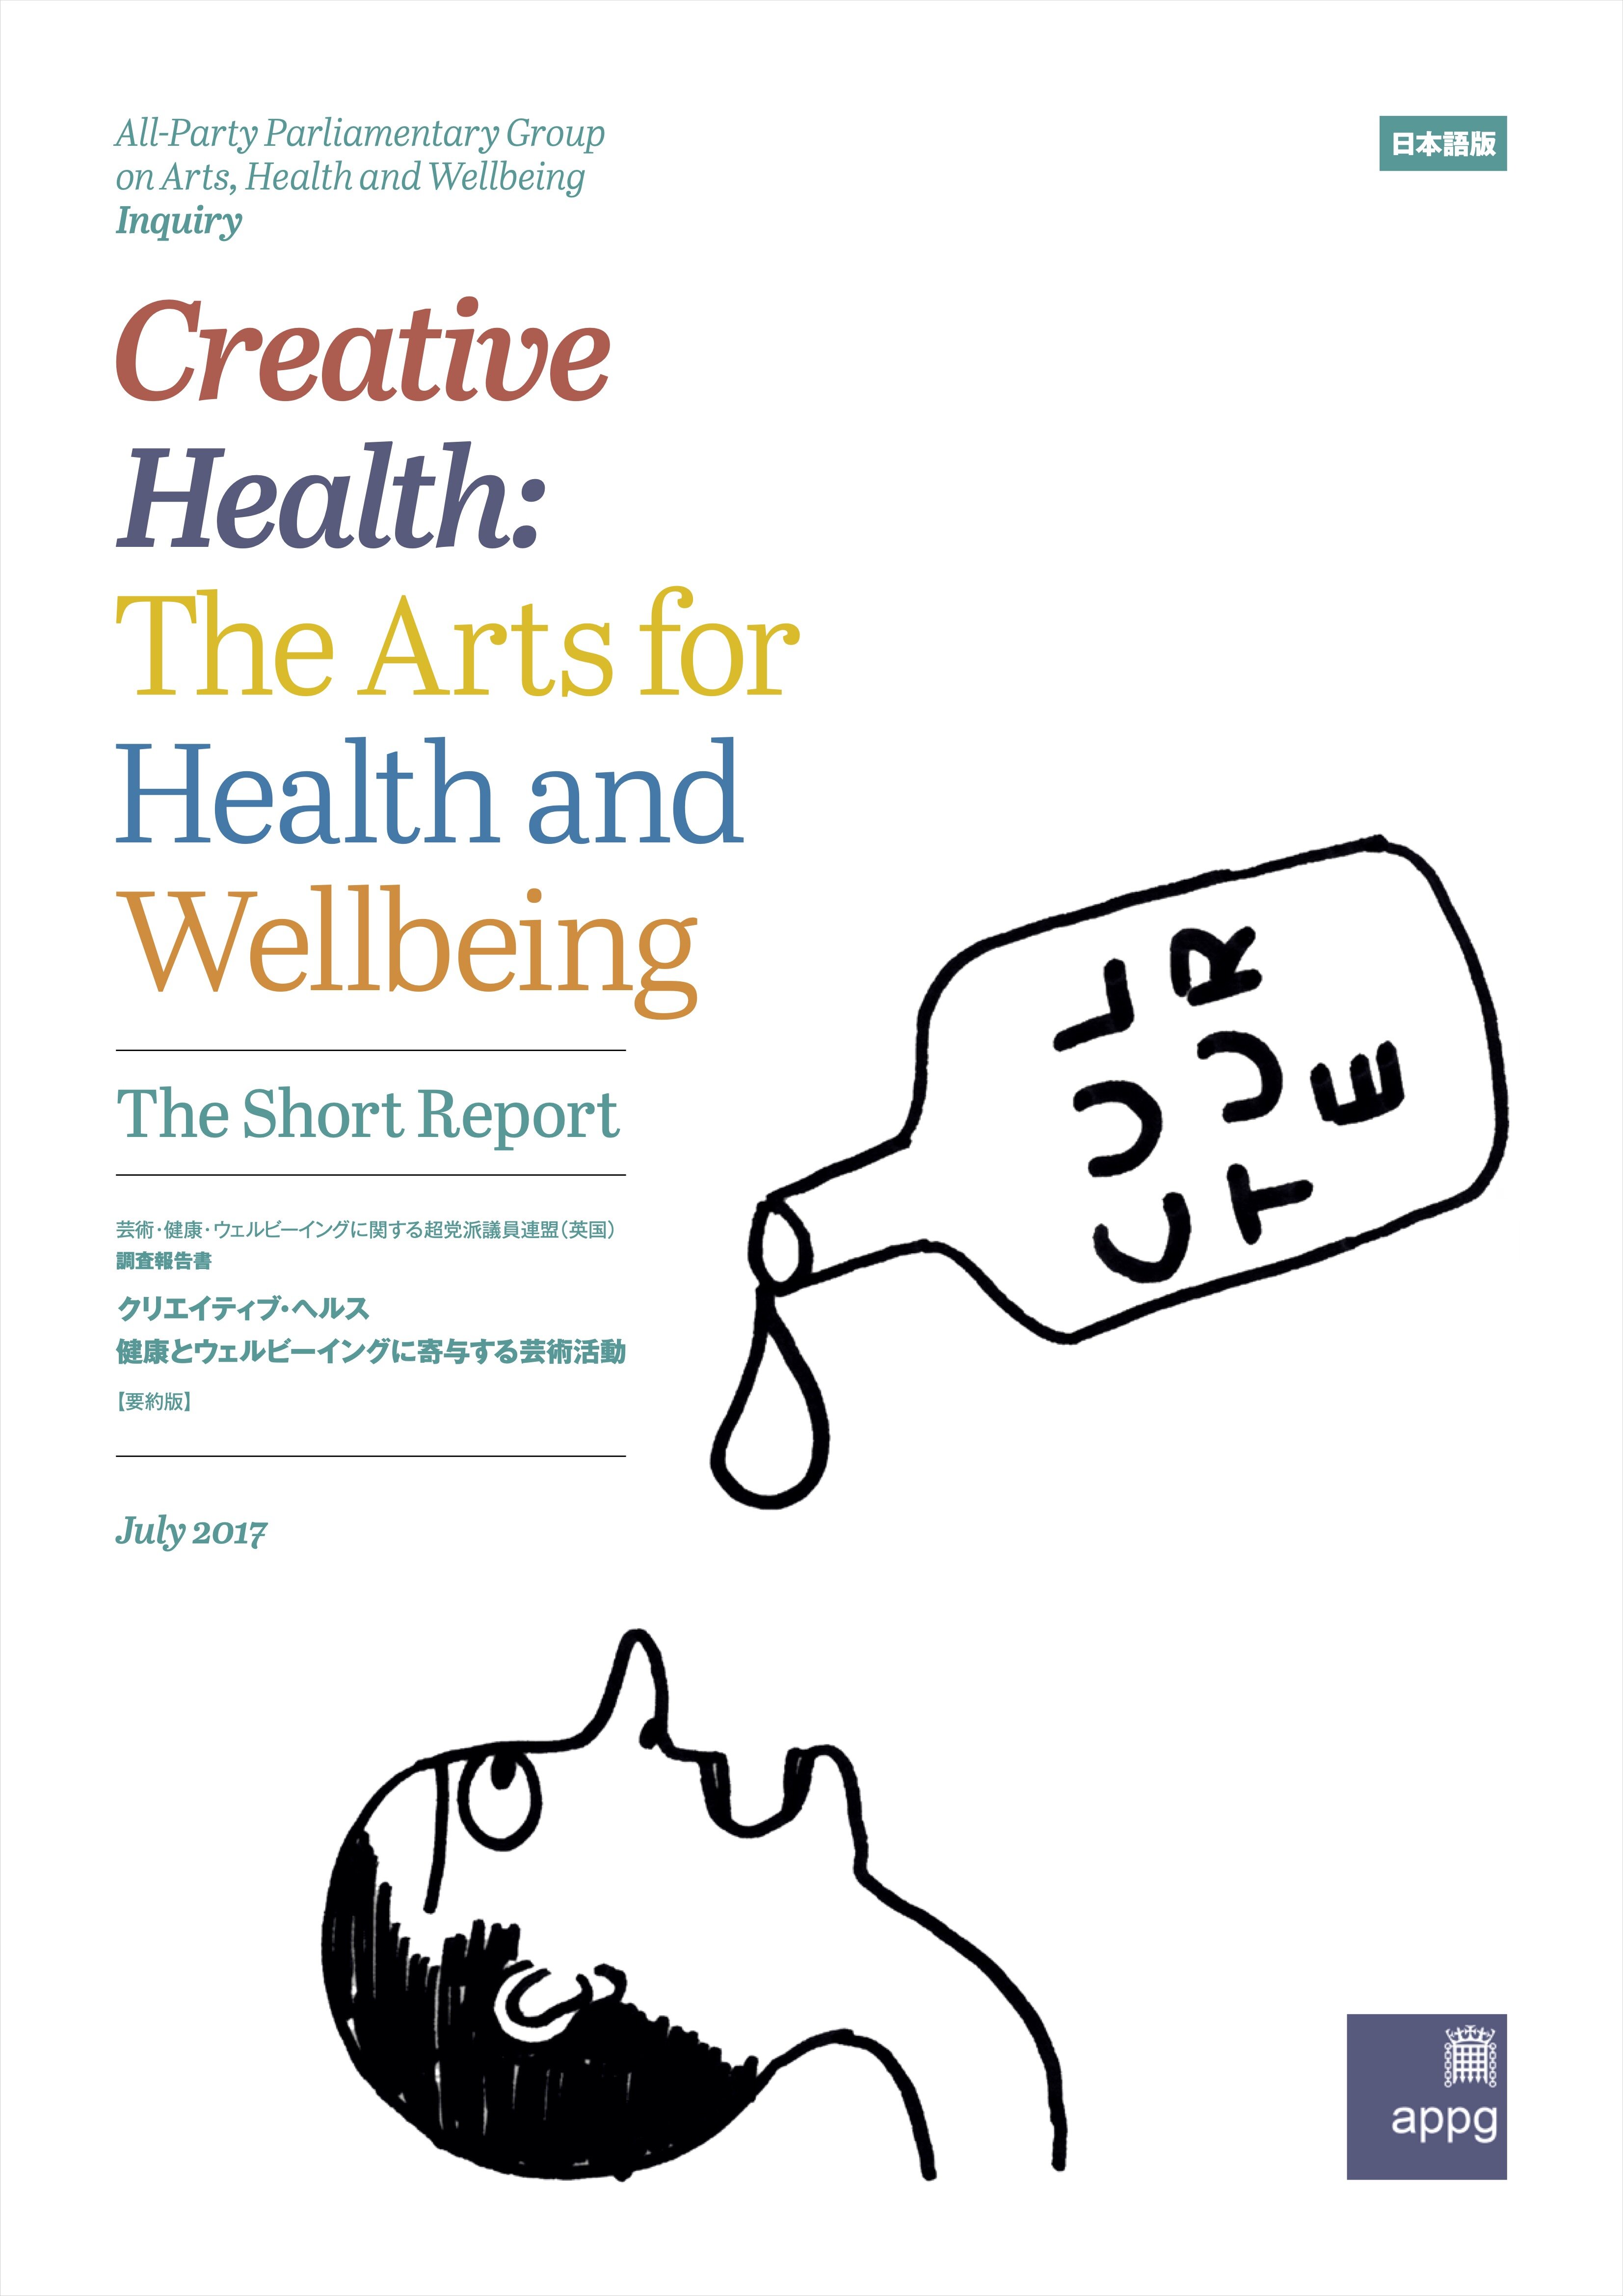 All-Party Parliamentary Group on Arts, Health and Wellbeing [Inquiry] Creative Health: The Arts for Health and Wellbeing (The Short Report)[Japanese edition]

